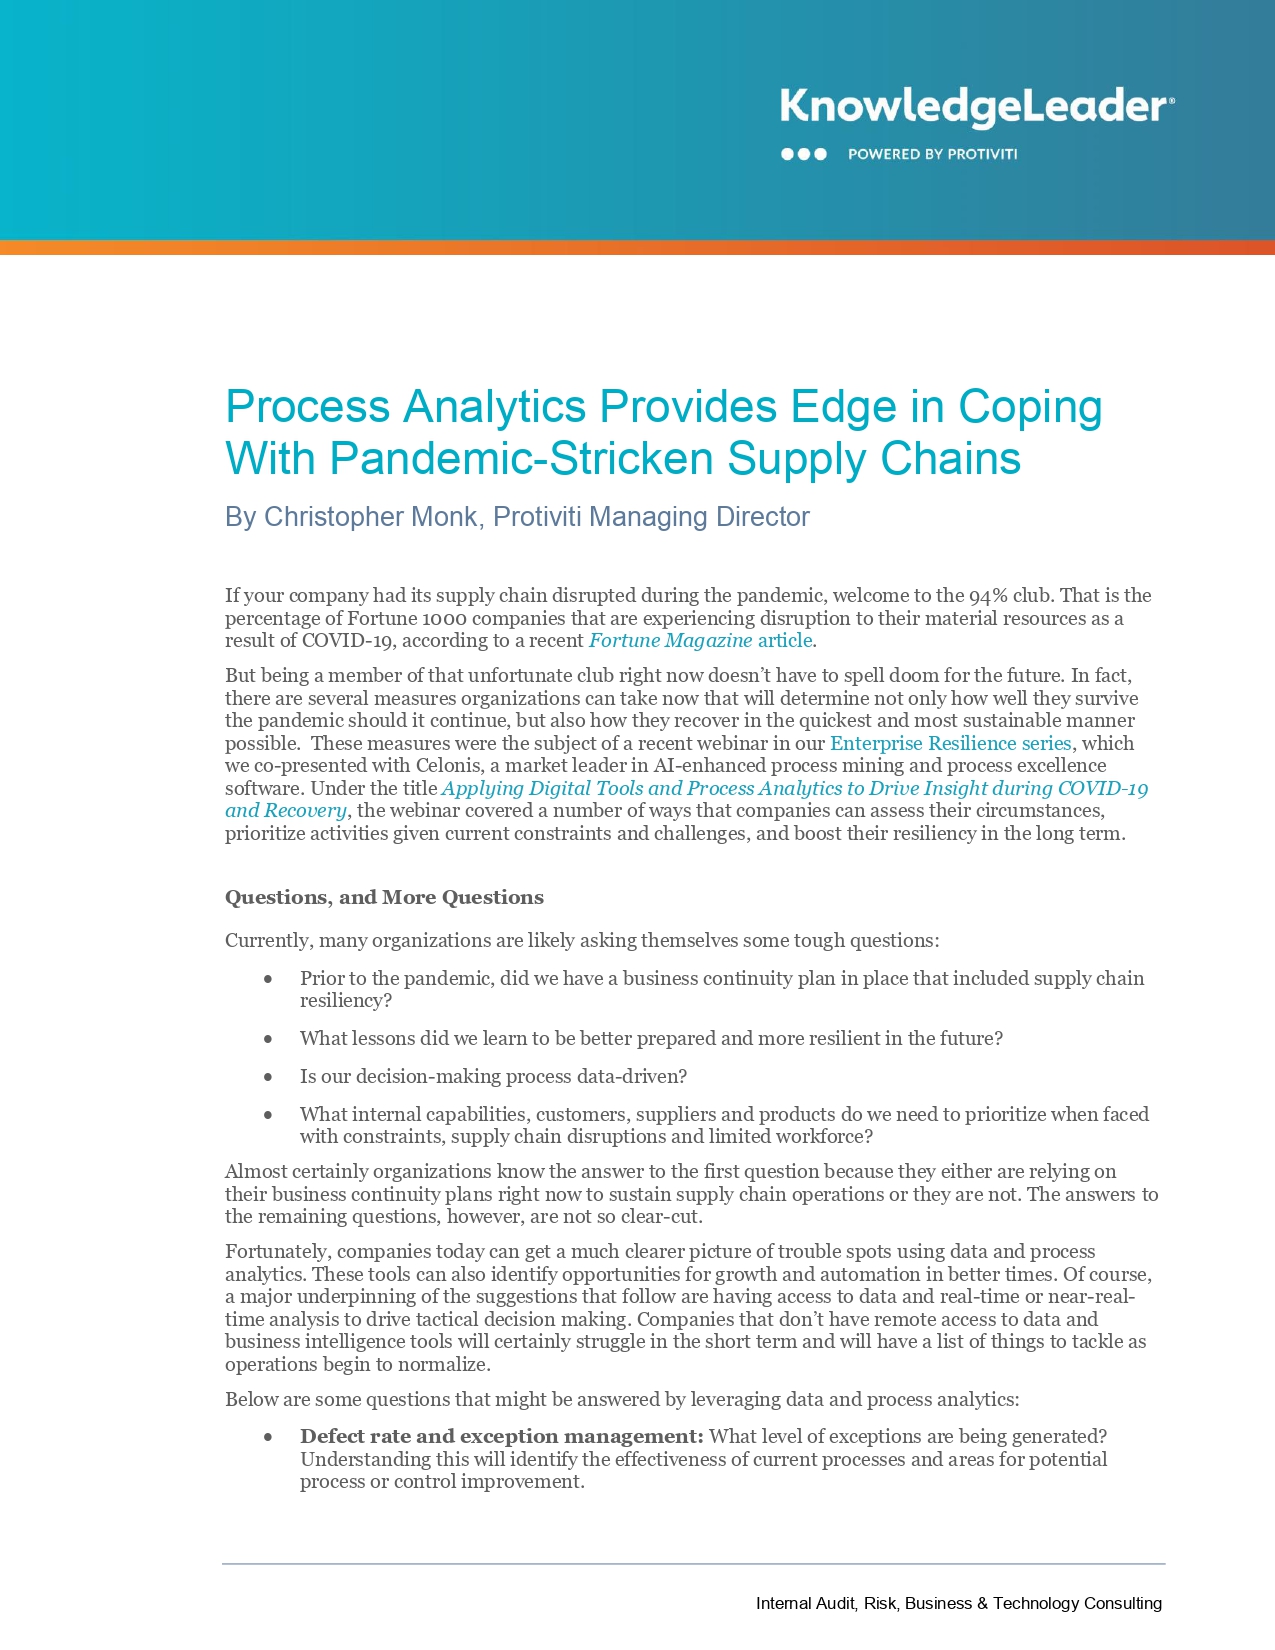 Screenshot of Process Analytics Provides Edge in Coping With Pandemic-Stricken Supply Chains